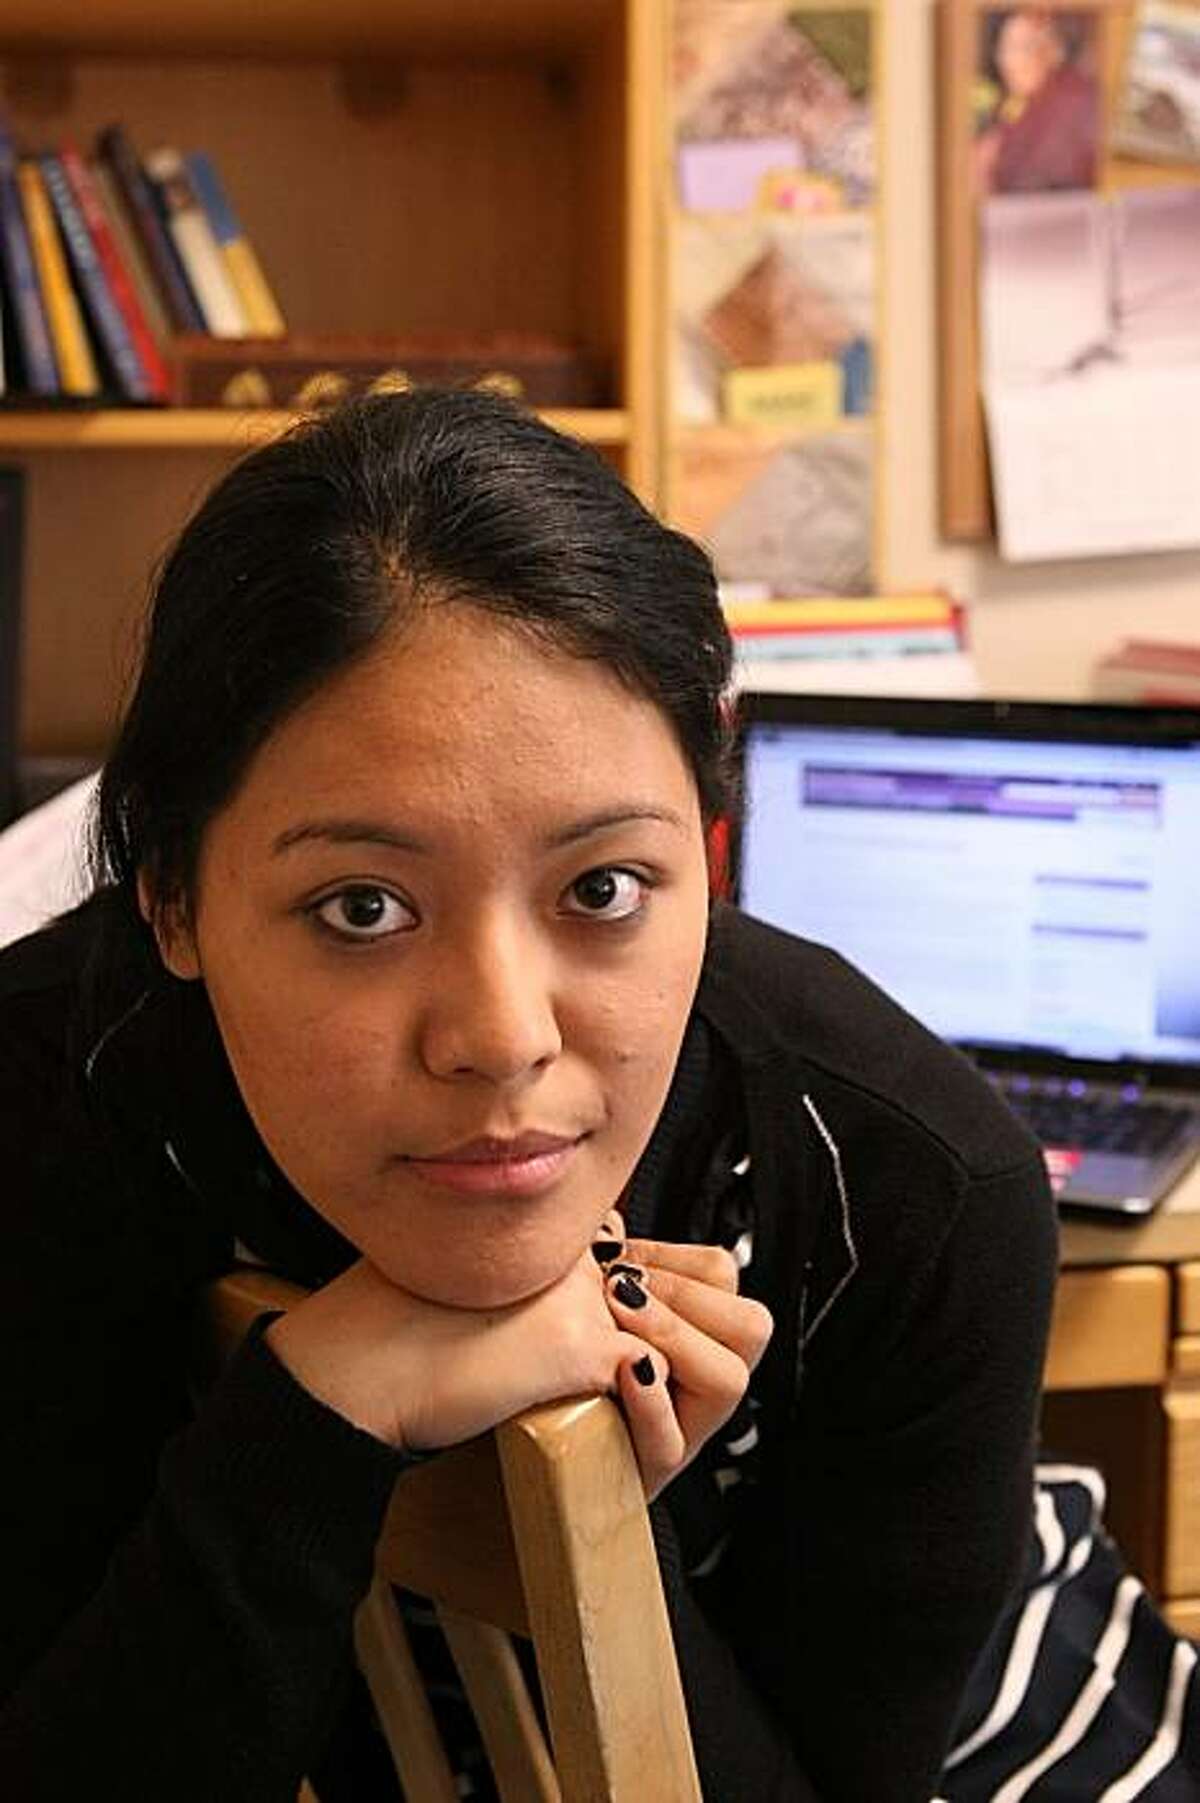 Tenzin Seldon, 20, a student at Stanford University and activist for a free Tibet, sits in her dorm room Friday, January 15, 2010. Seldon's Gmail account was recently hacked in the flurry of cyber attacks against advocates of human rights that originated in China late last year and prompted Google to threaten to leave the country.